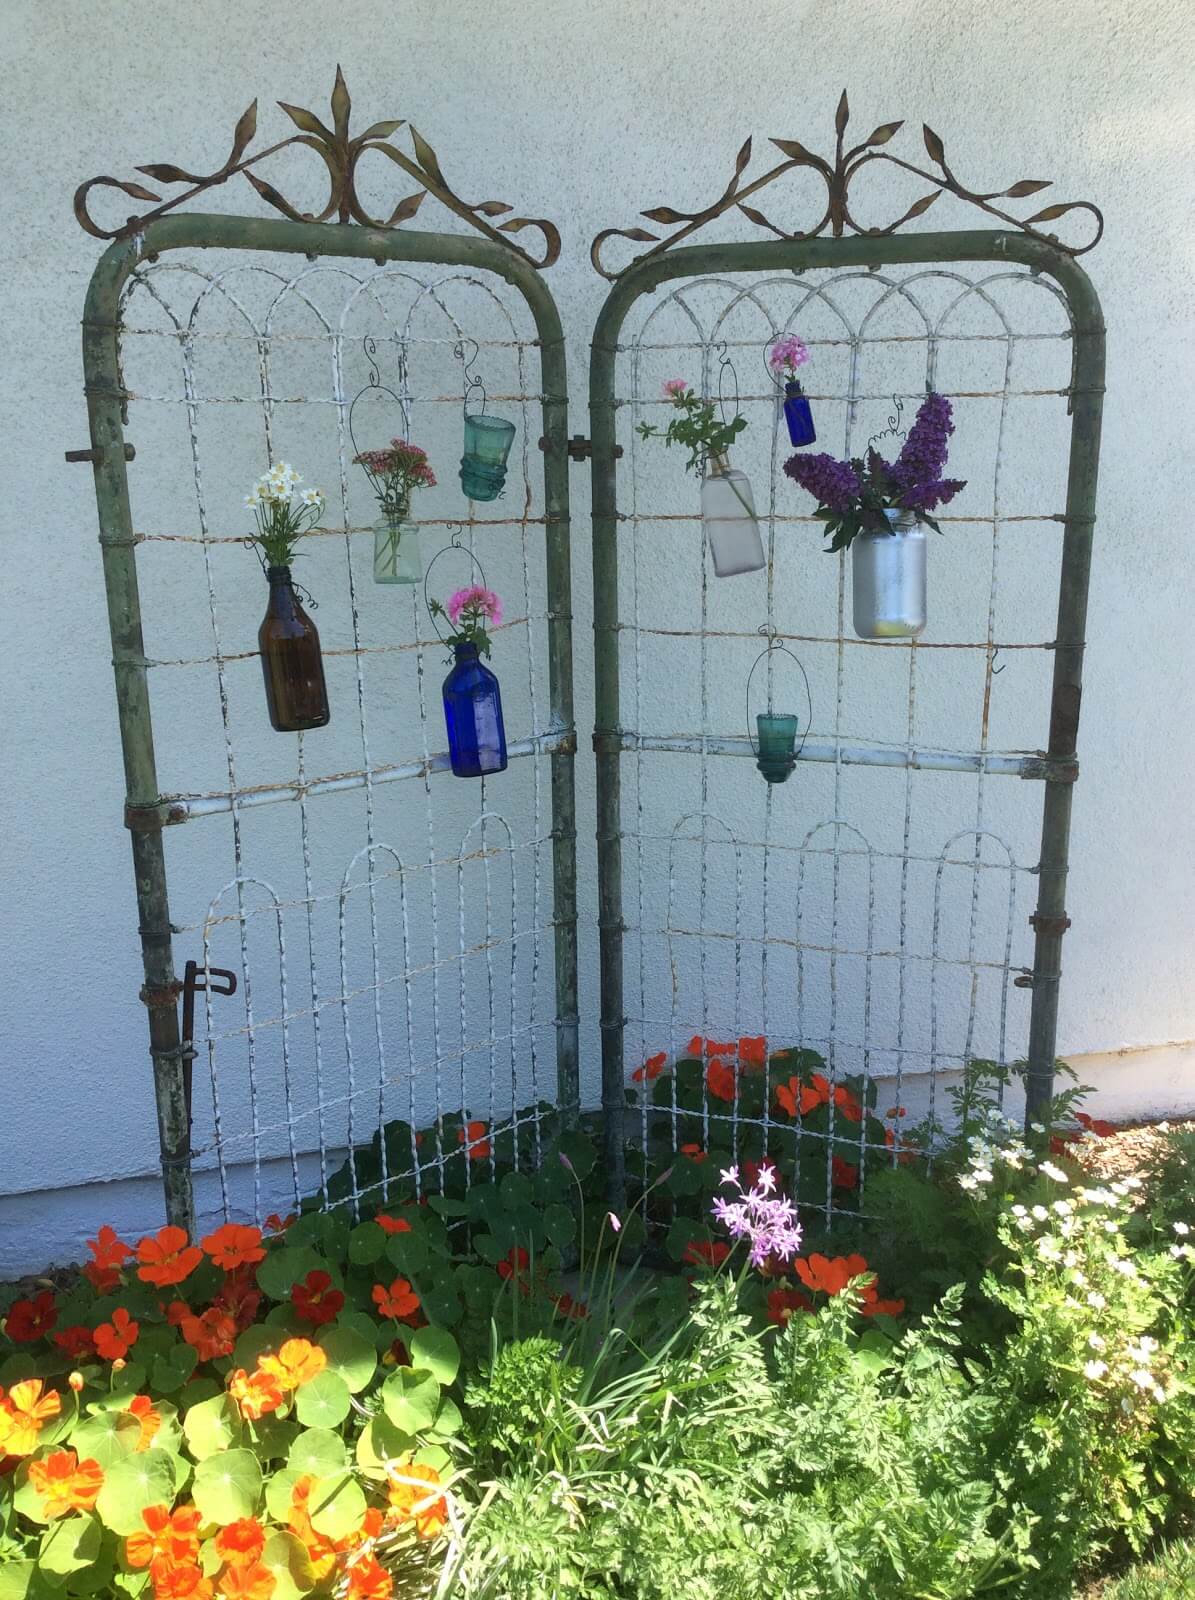 Whimsical Iron Gate with Flower Vases